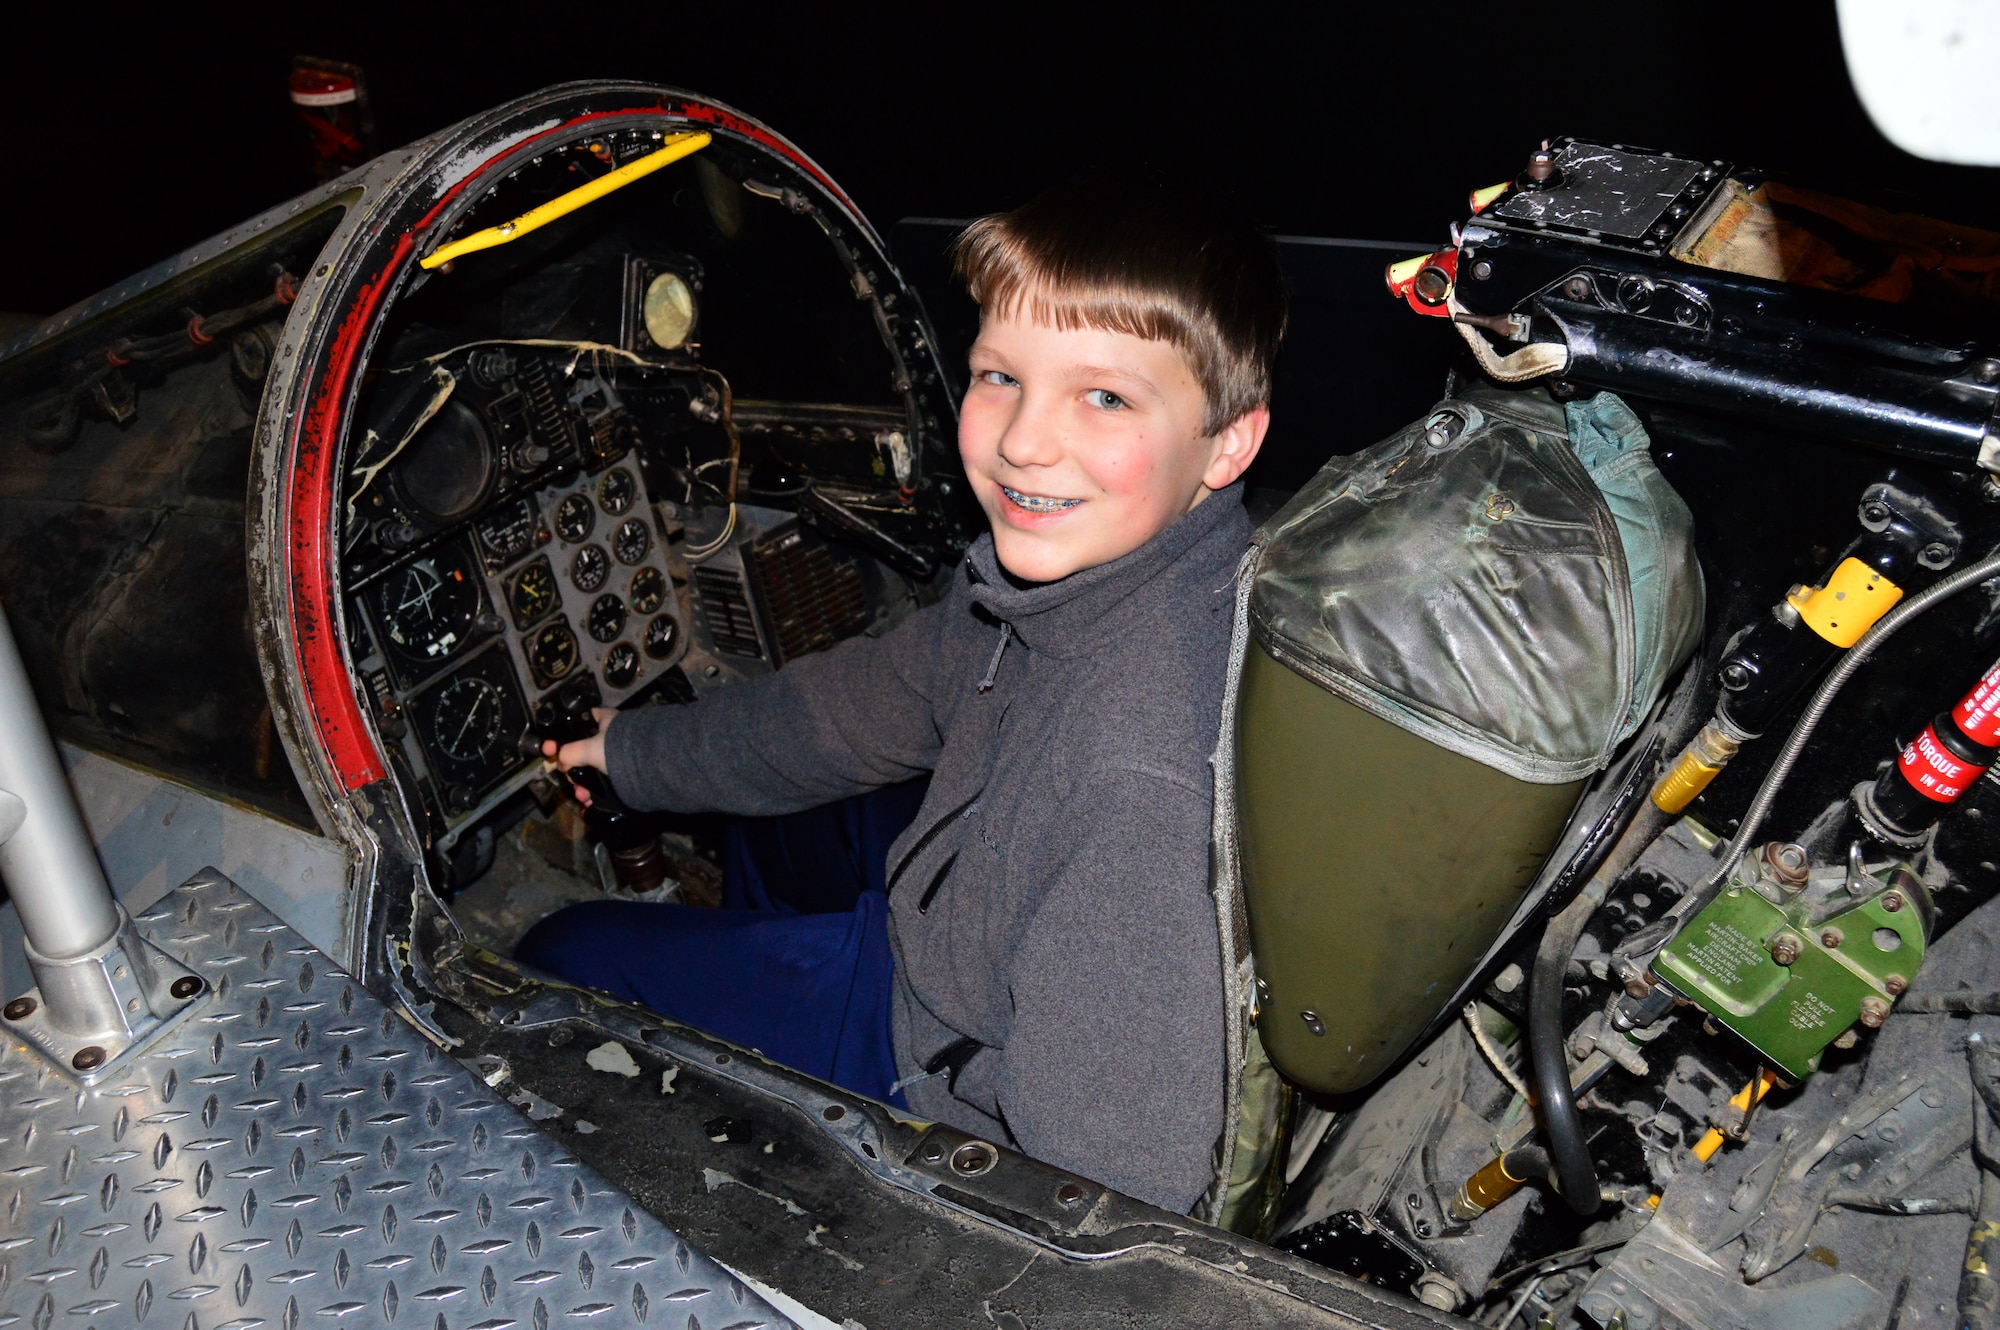 DAYTON, Ohio - A museum visitor enjoying the F-4D Phantom II Sit-in Cockpit in the Cold War Gallery at the National Museum of the U.S. Air Force. (U.S. Air Force photo)
